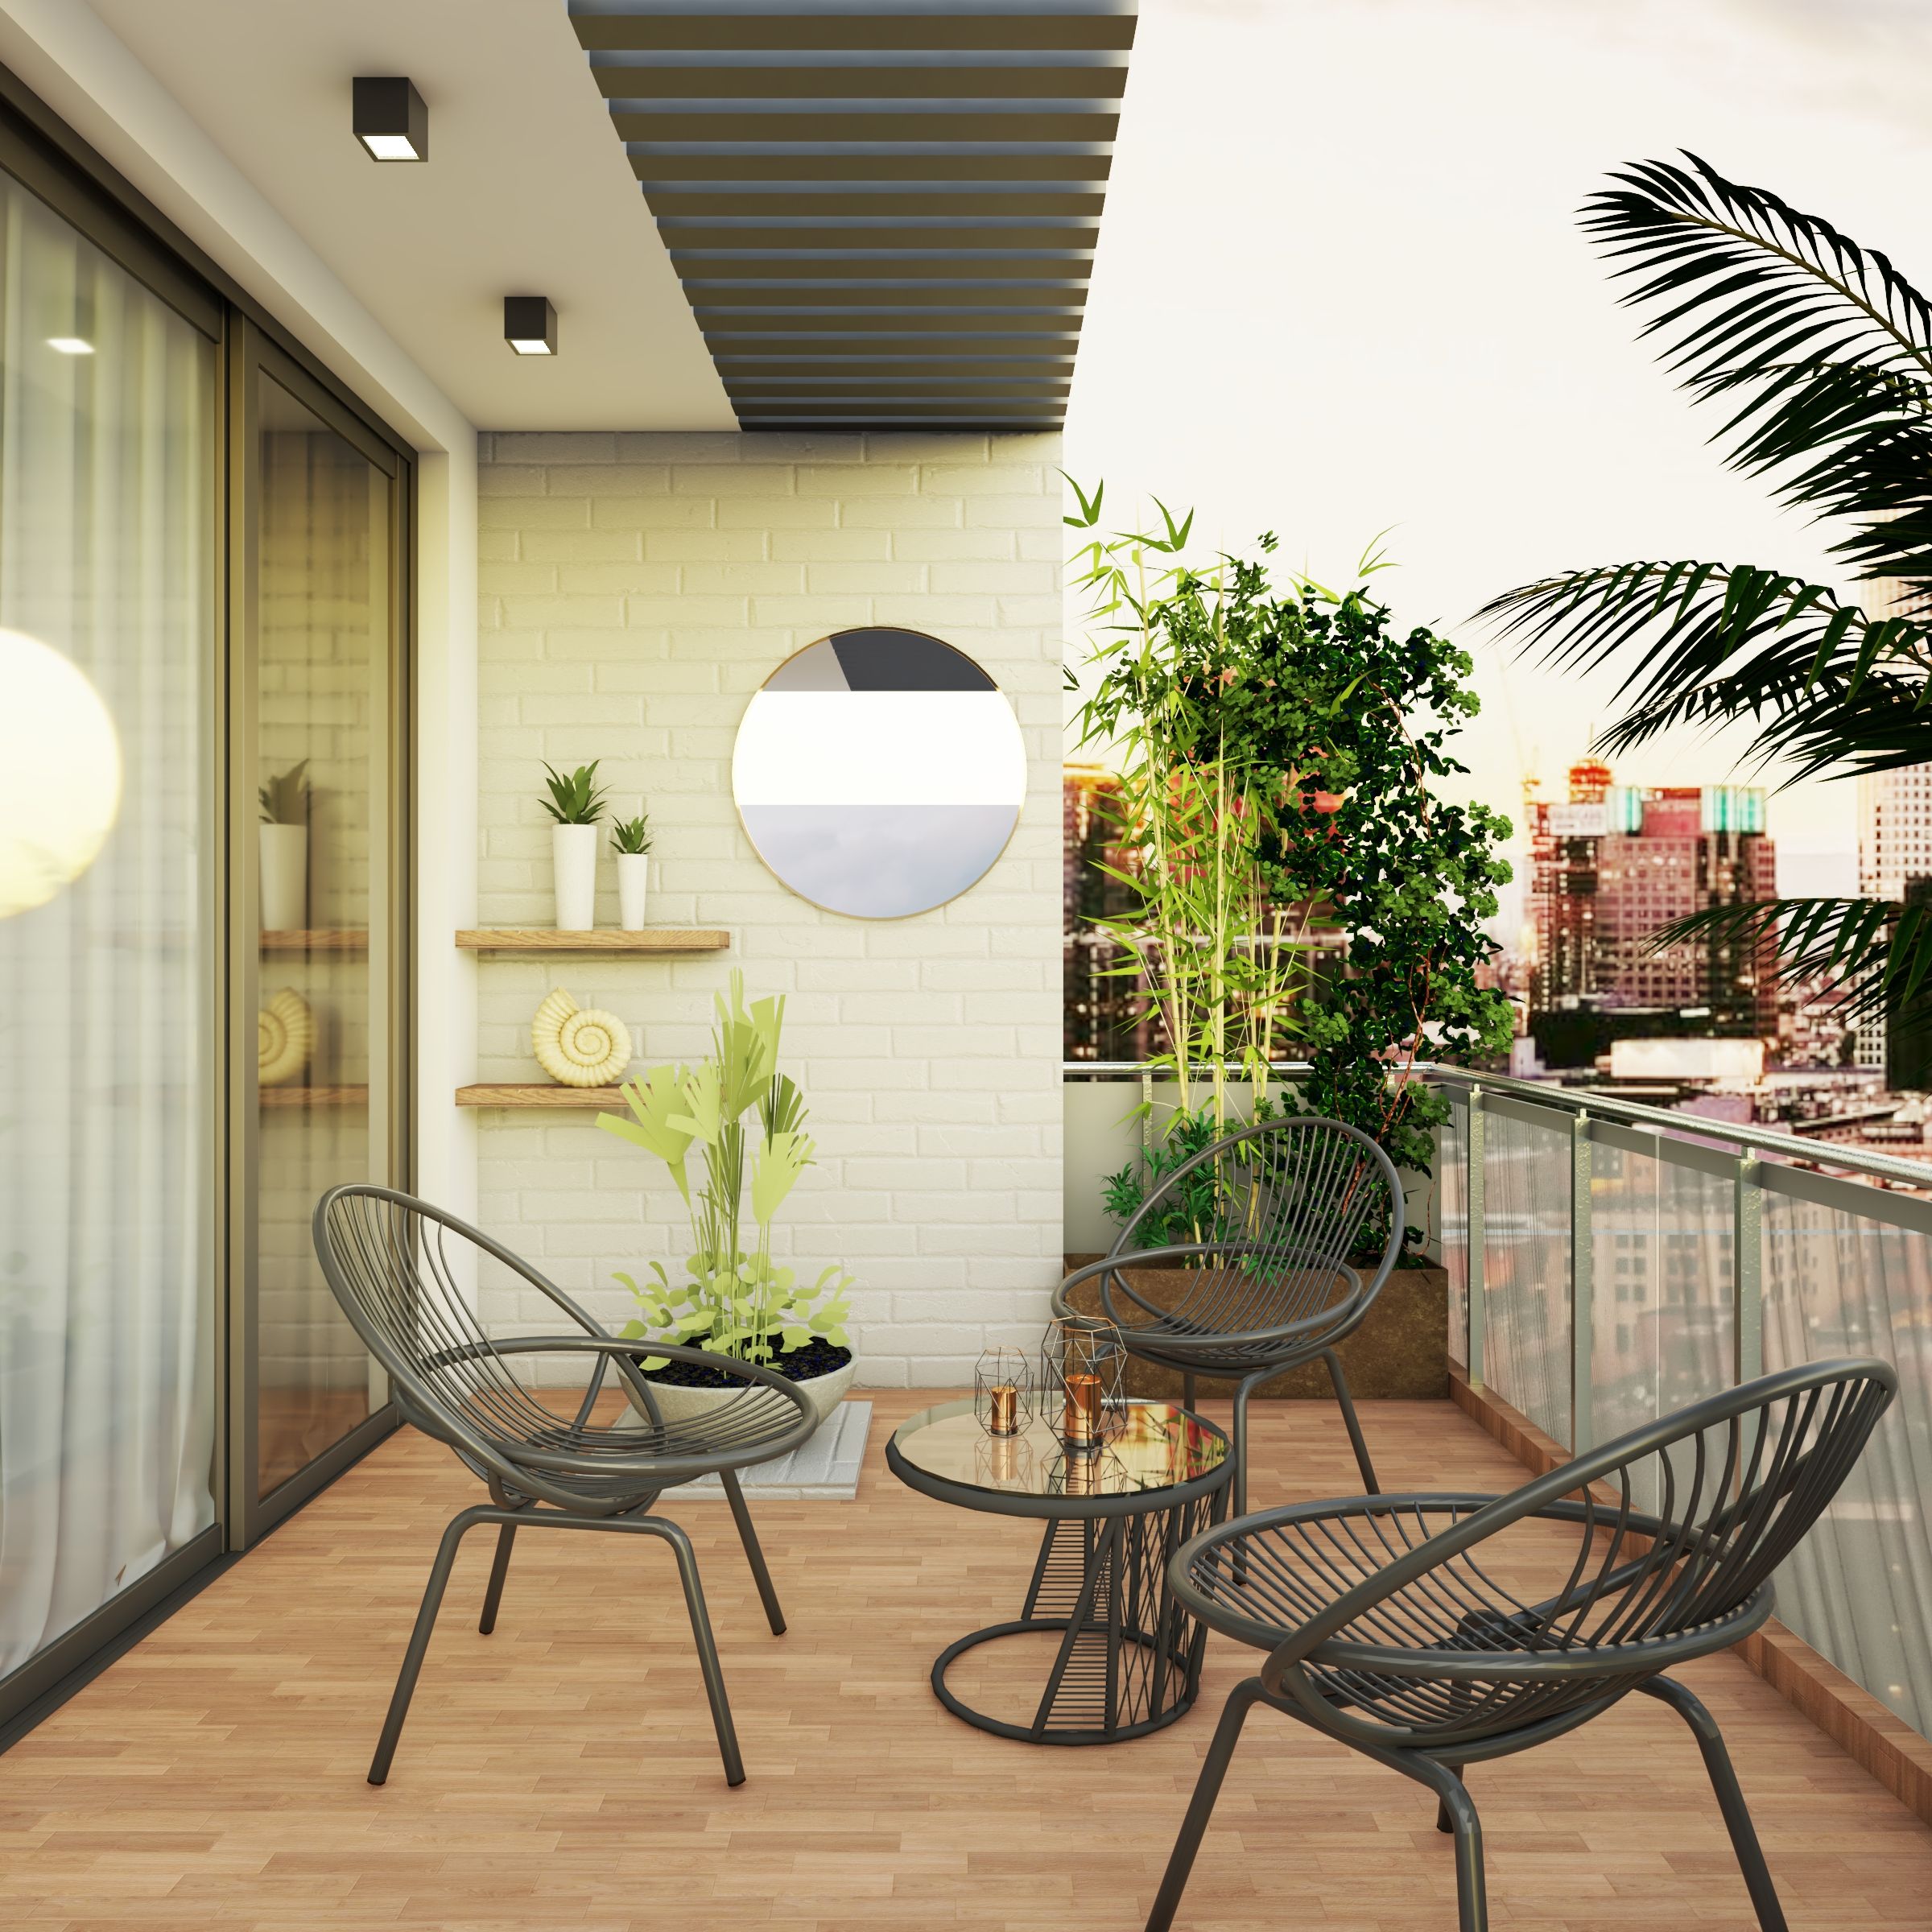 Spacious Open Balcony Design with Open Ledges and Plants